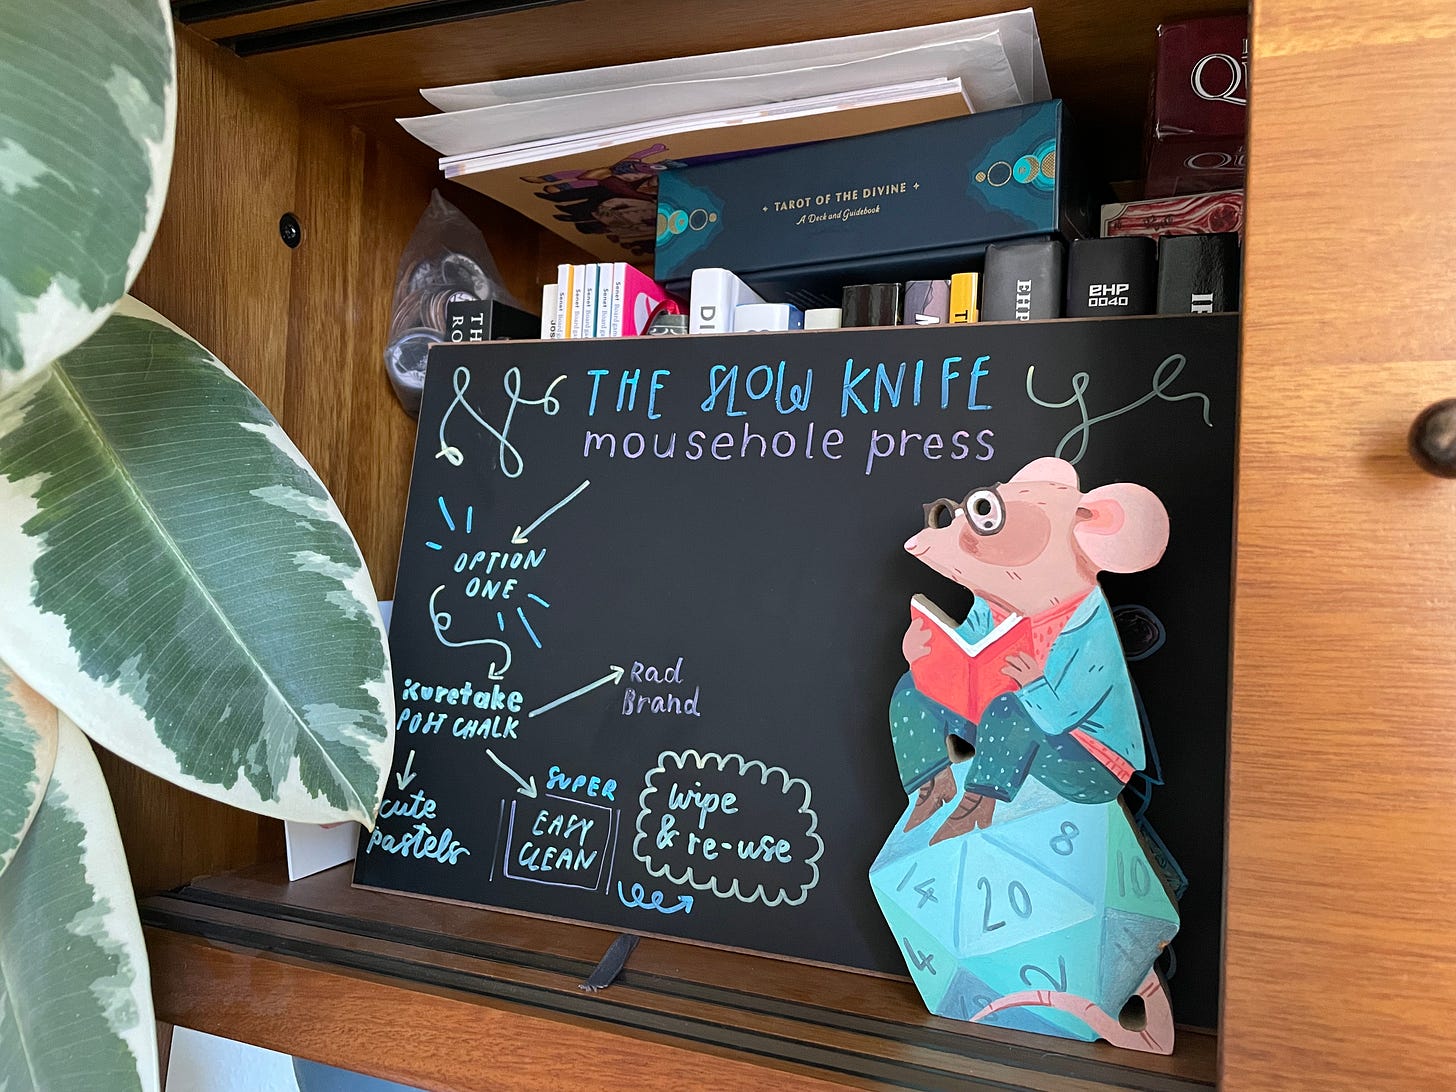 A decorated chalk board that reads 'The Slow Knife, Mousehole Press'. It has a load of arrows and boxes in different chalk colours. Behind, there are some books stacked up and in front there is a wooden standee of the Mousehole Press logo.